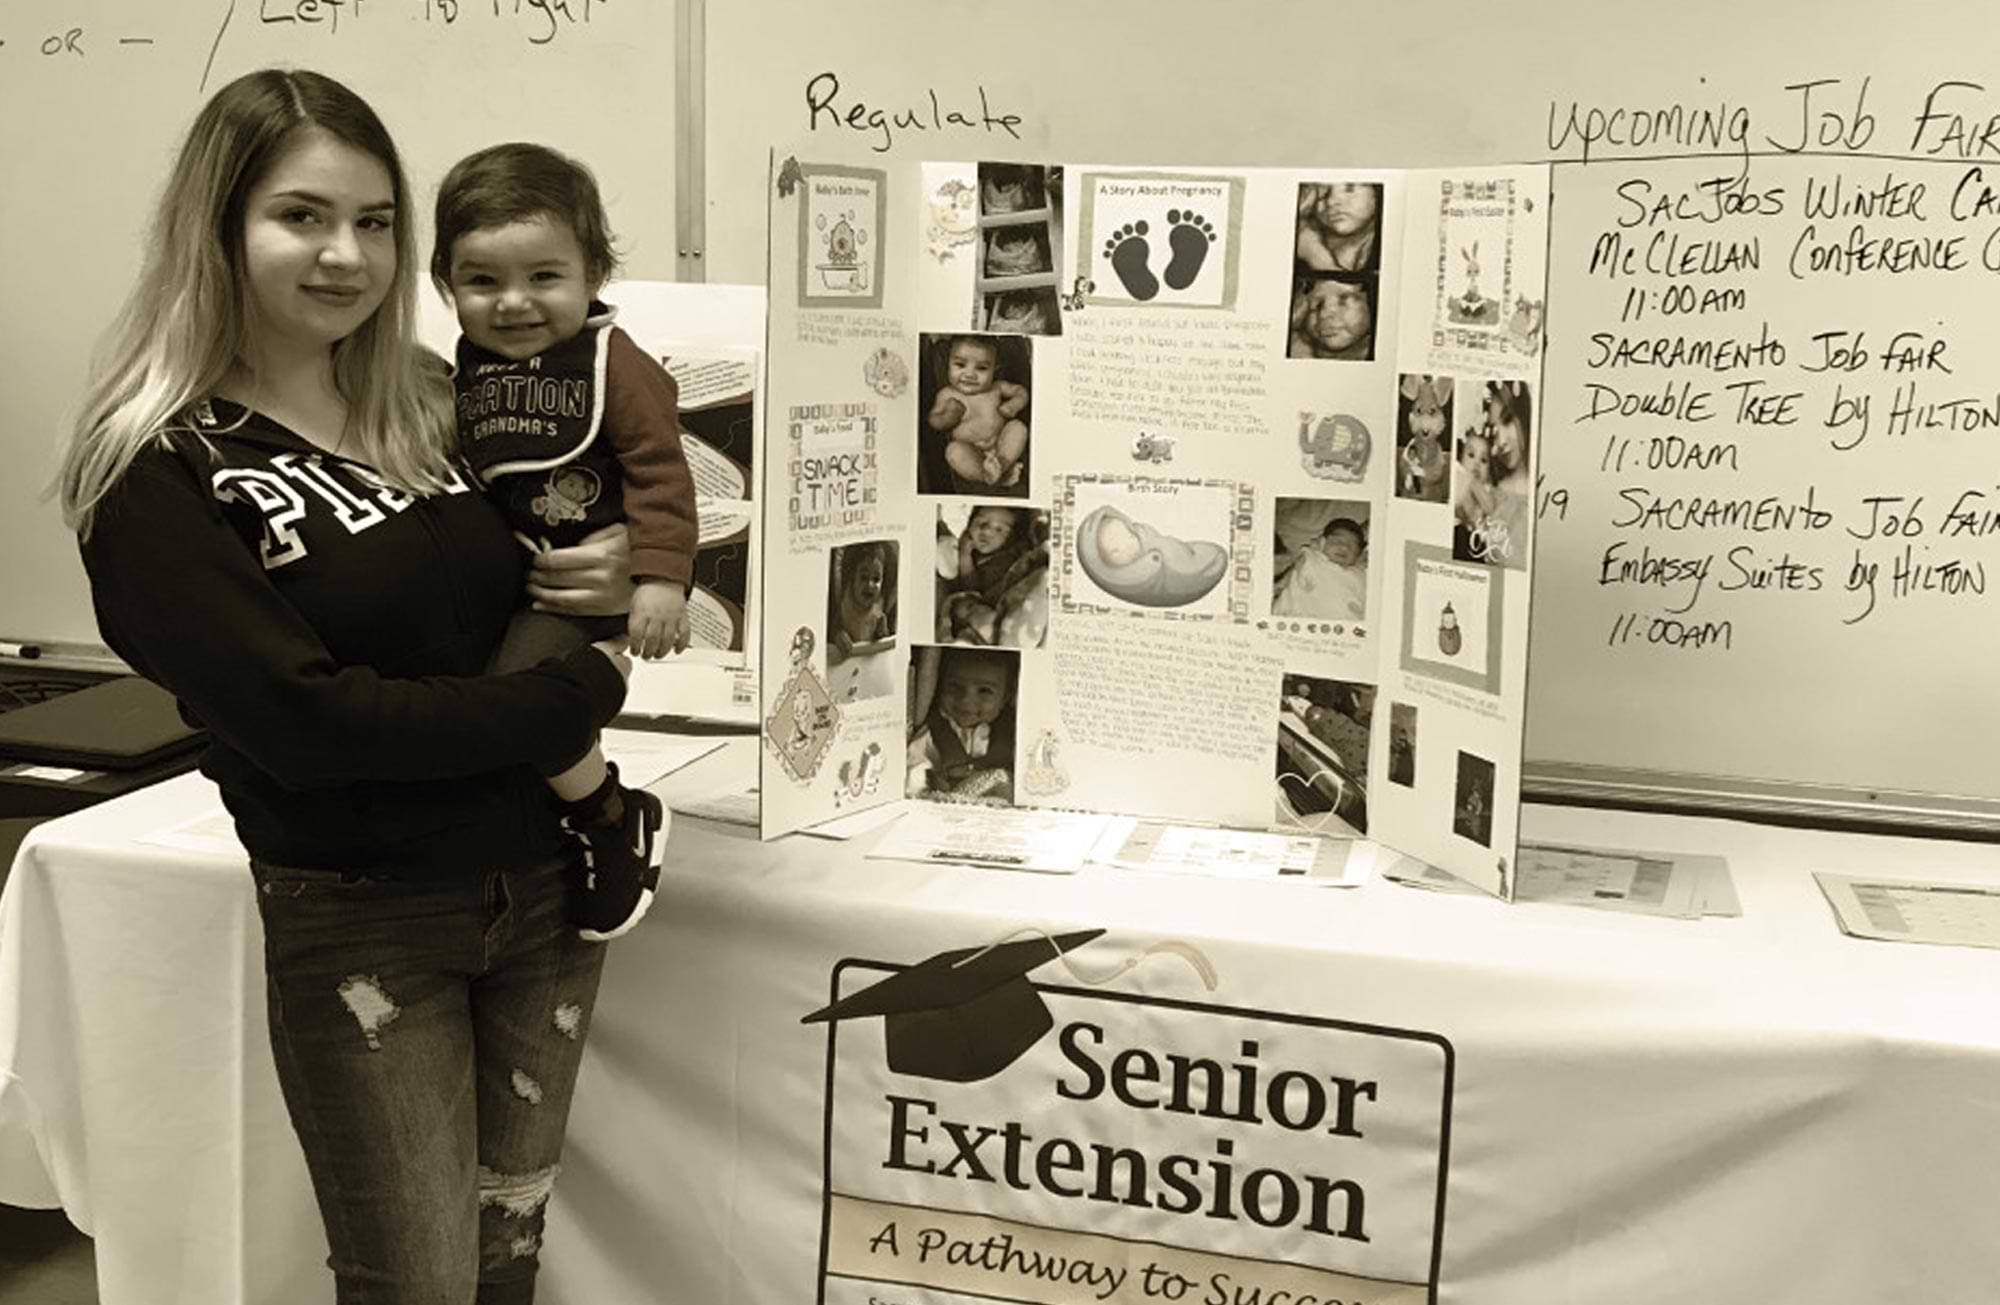 a smiling young woman stands in front of a "Senior Extension" event table holding a smiling toddler